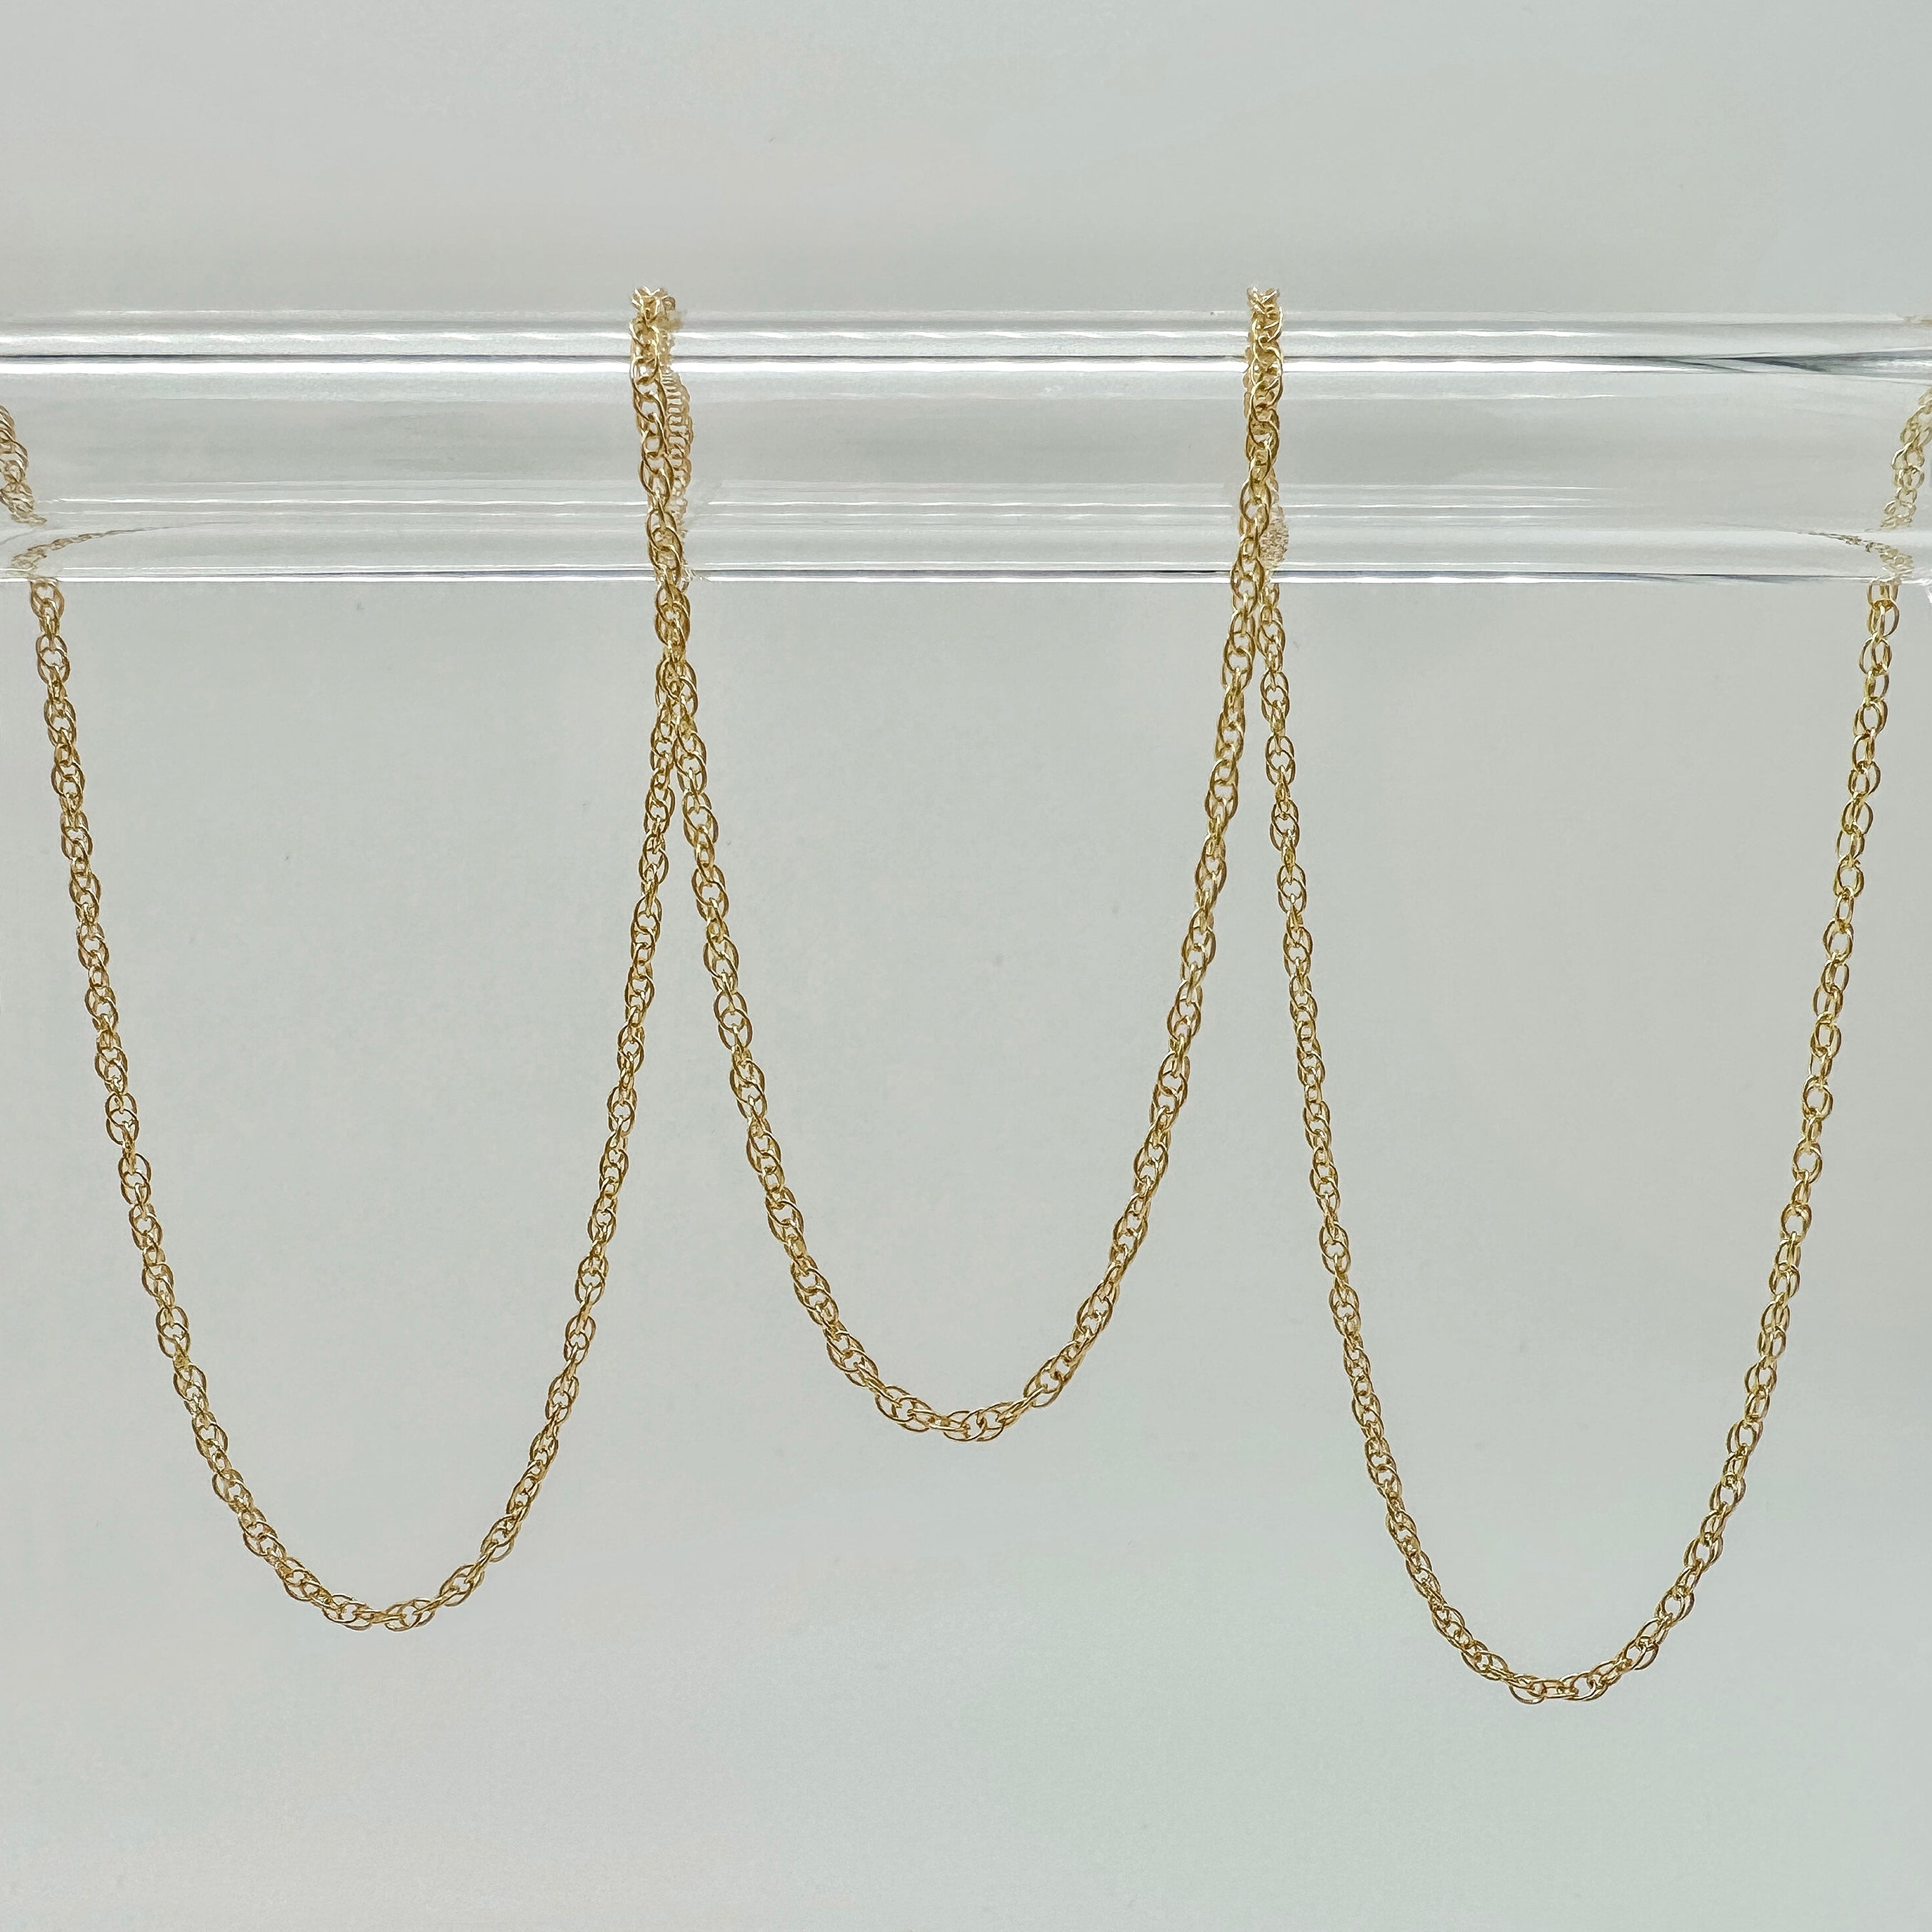 gold filled rope chain permanent jewelry supplies